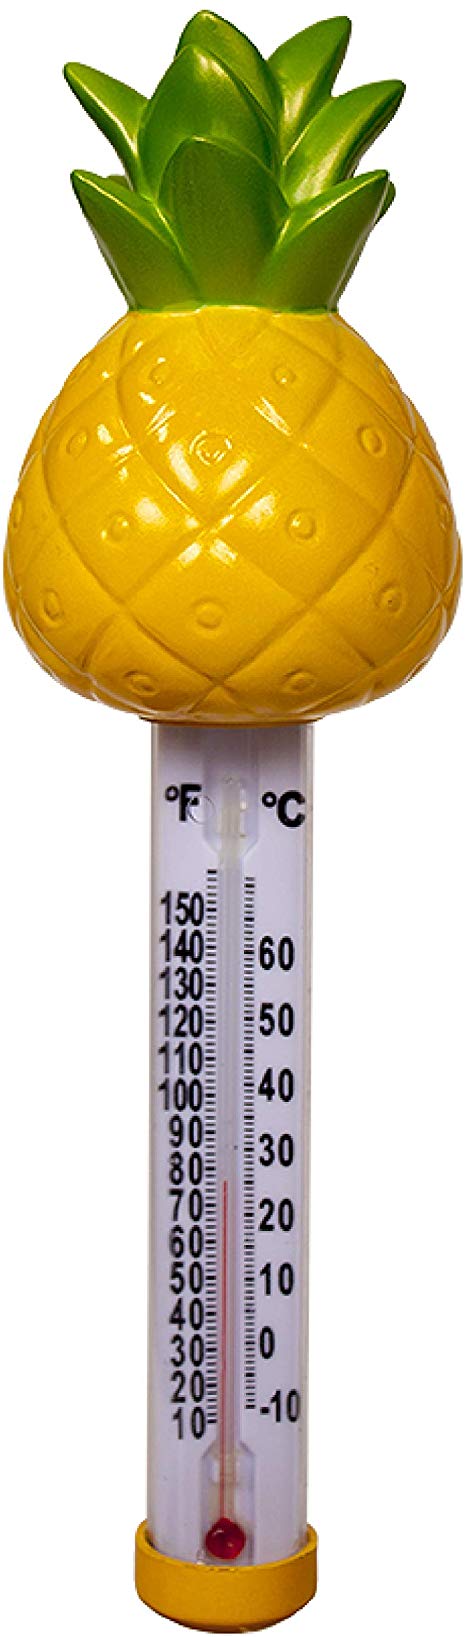 GAME 13027-BB Pineapple Spa and Pool Thermometer Shatter-Resistant Casing Tether Included, Fahrenheit and Celsius, 9-in Height x 3-1/2-in Diameter